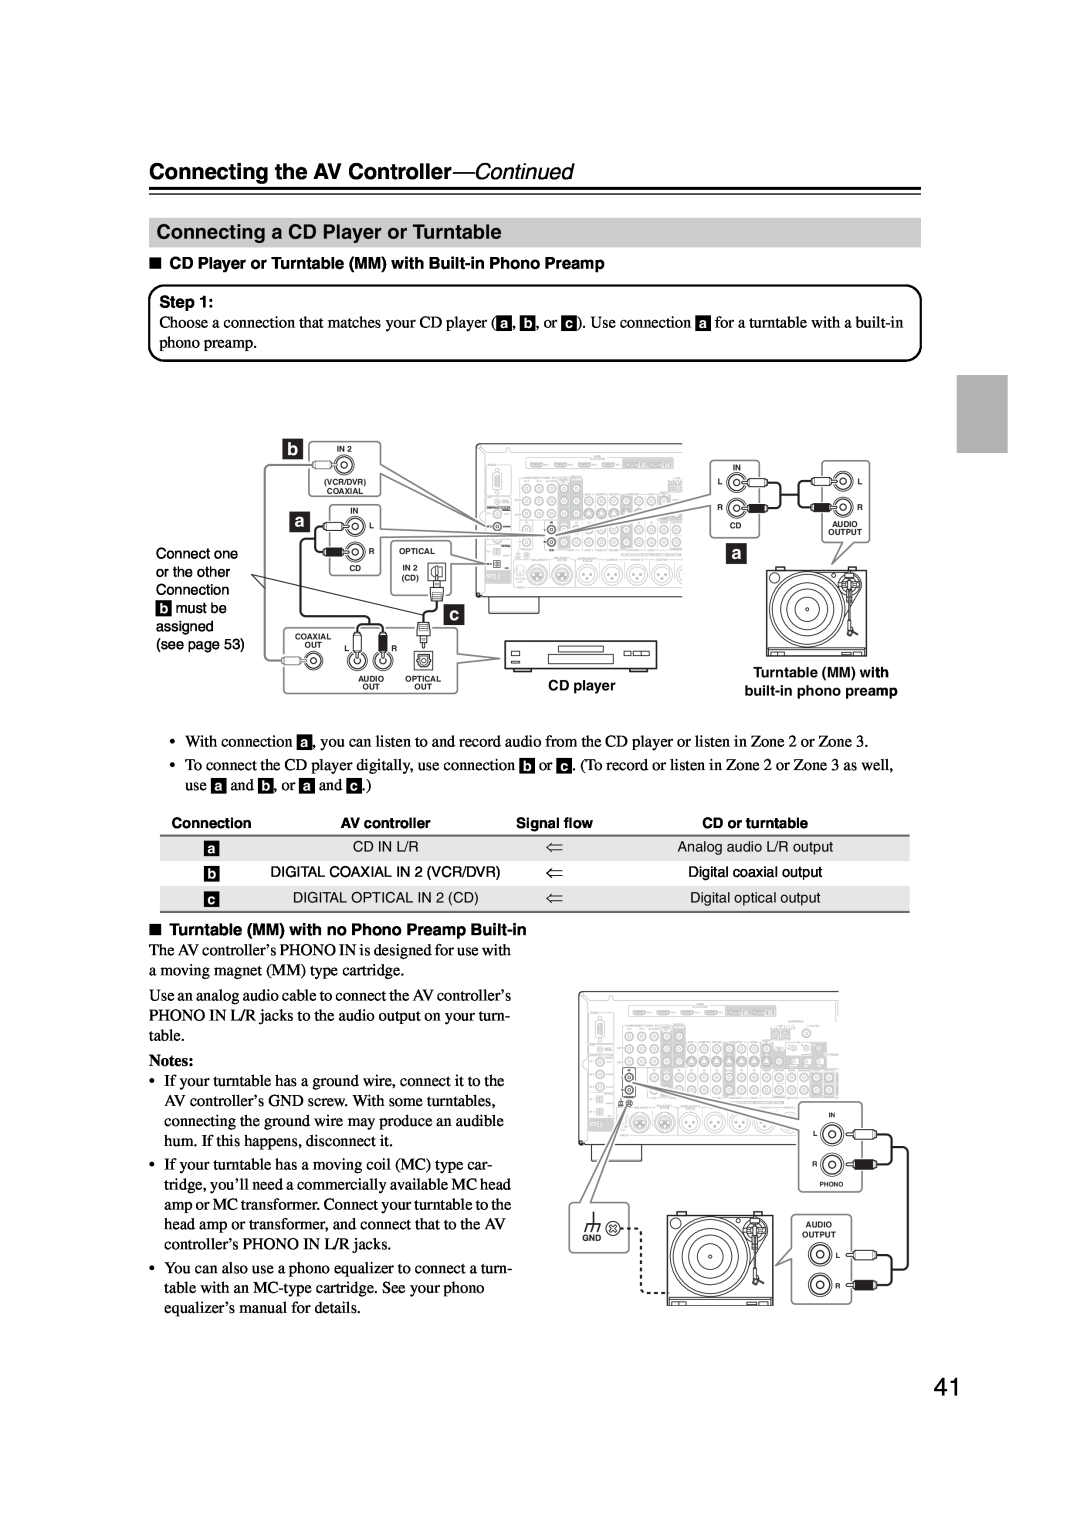 Integra DHC-9.9 instruction manual Connecting a CD Player or Turntable, Connecting the AV Controller—Continued, Step, Notes 